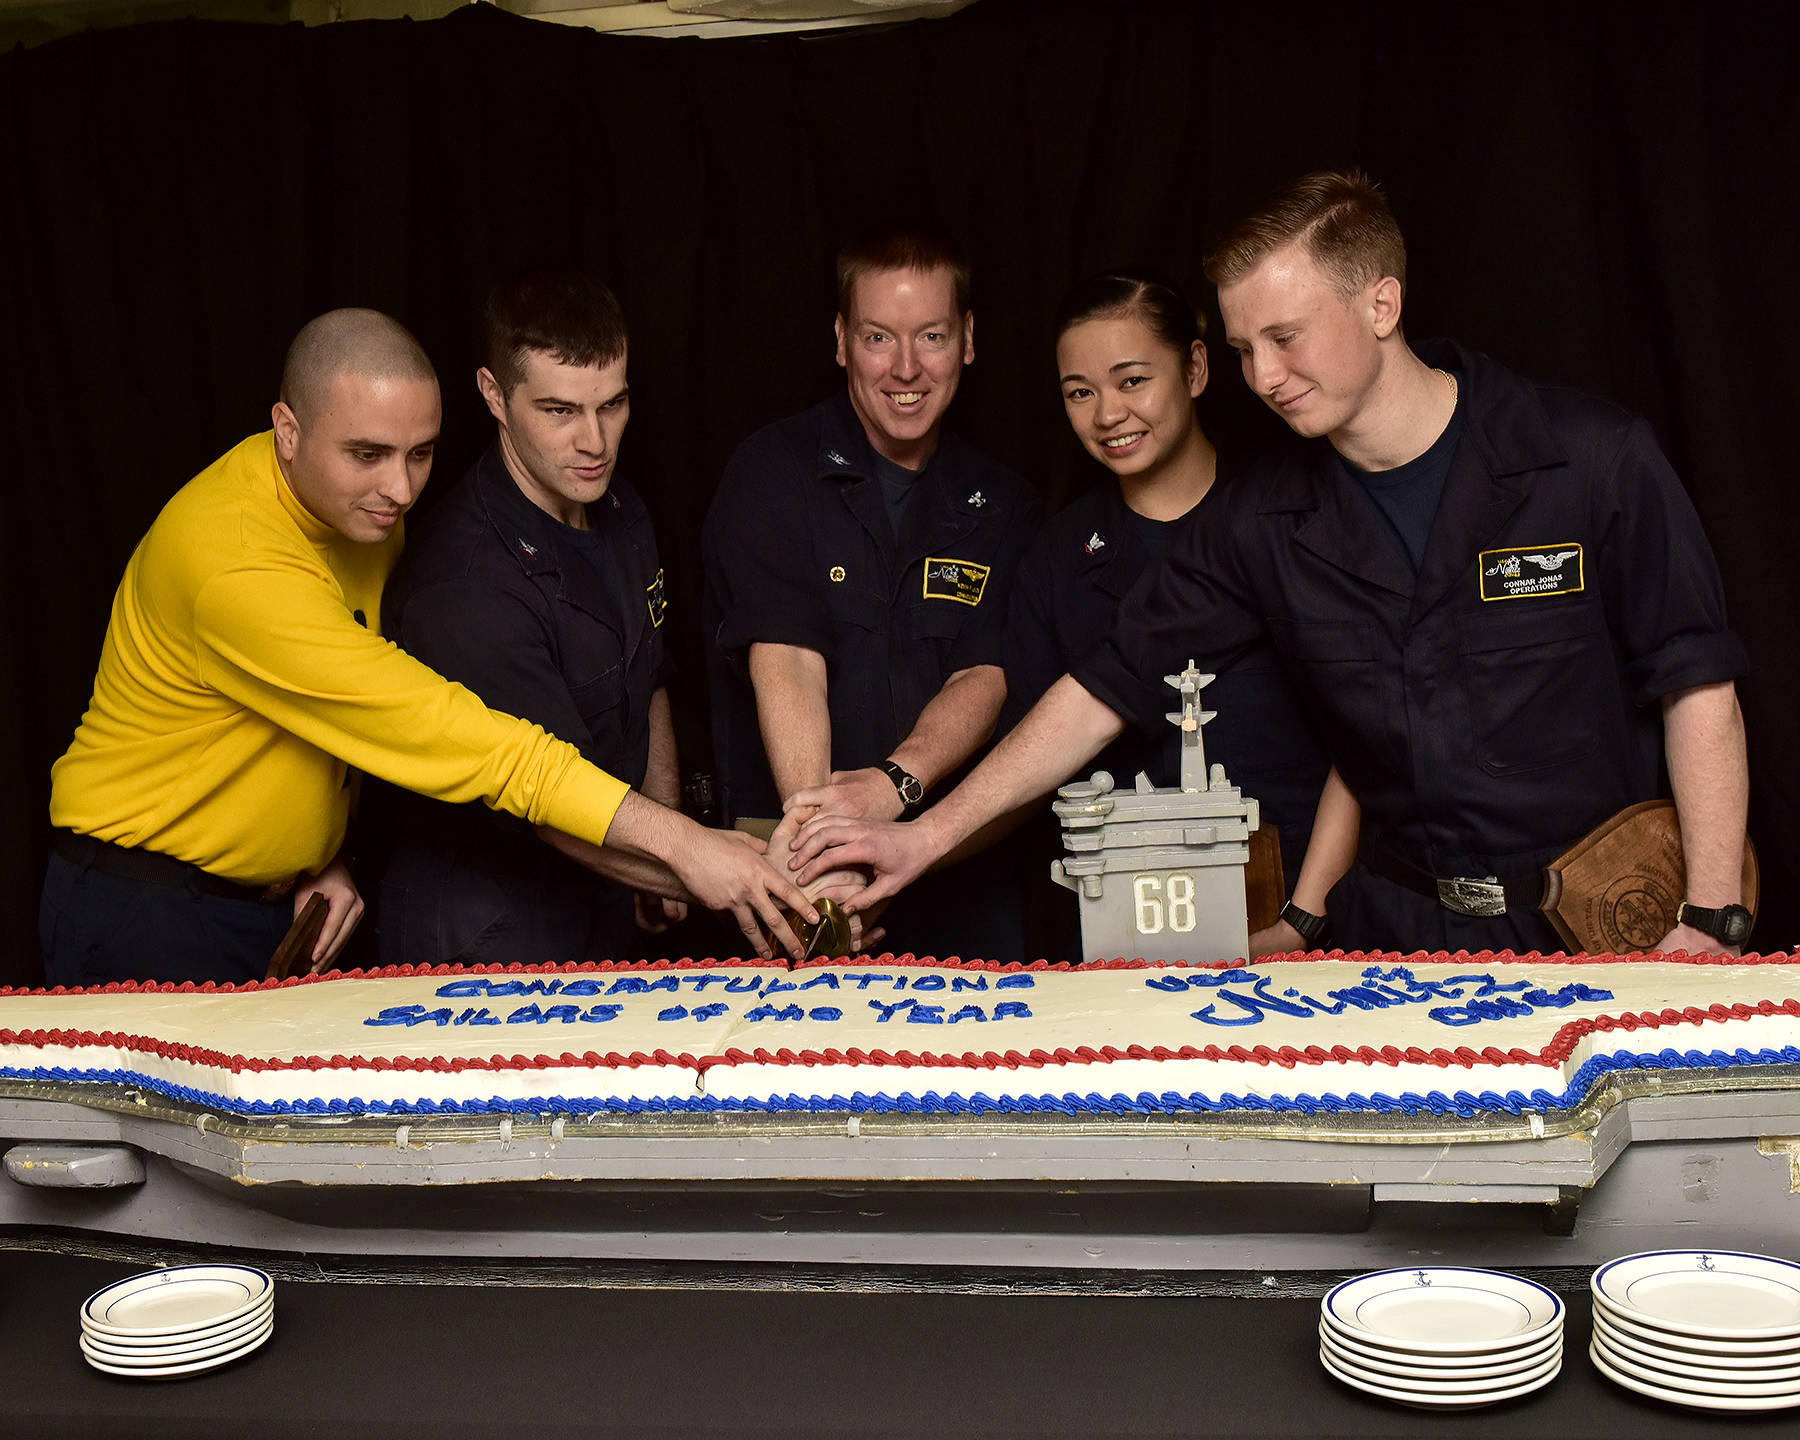 U.S. Navy sailors aboard the aircraft carrier USS Nimitz (CVN 68), cut the Sailor of the Year cake, Nov. 3 in the Sea of Japan. From left, Aviation Boatswain’s Mate (Handling) 1st Class Hugo Echeverritrujillo, Senior Sailor of the Year; Hospital Corpsman 2nd Class James Gibbens, Sailor of the Year; Capt. Kevin Lenox, commanding officer; Electronics Technician 3rd Class Dallymae Arce, Junior Sailor of the Year; Air Traffic Controller Airman Apprentice Connor Jonas, Blue Jacket of the Year. (Mass Communication Specialist Seaman Emily Johnston/U.S. Navy)